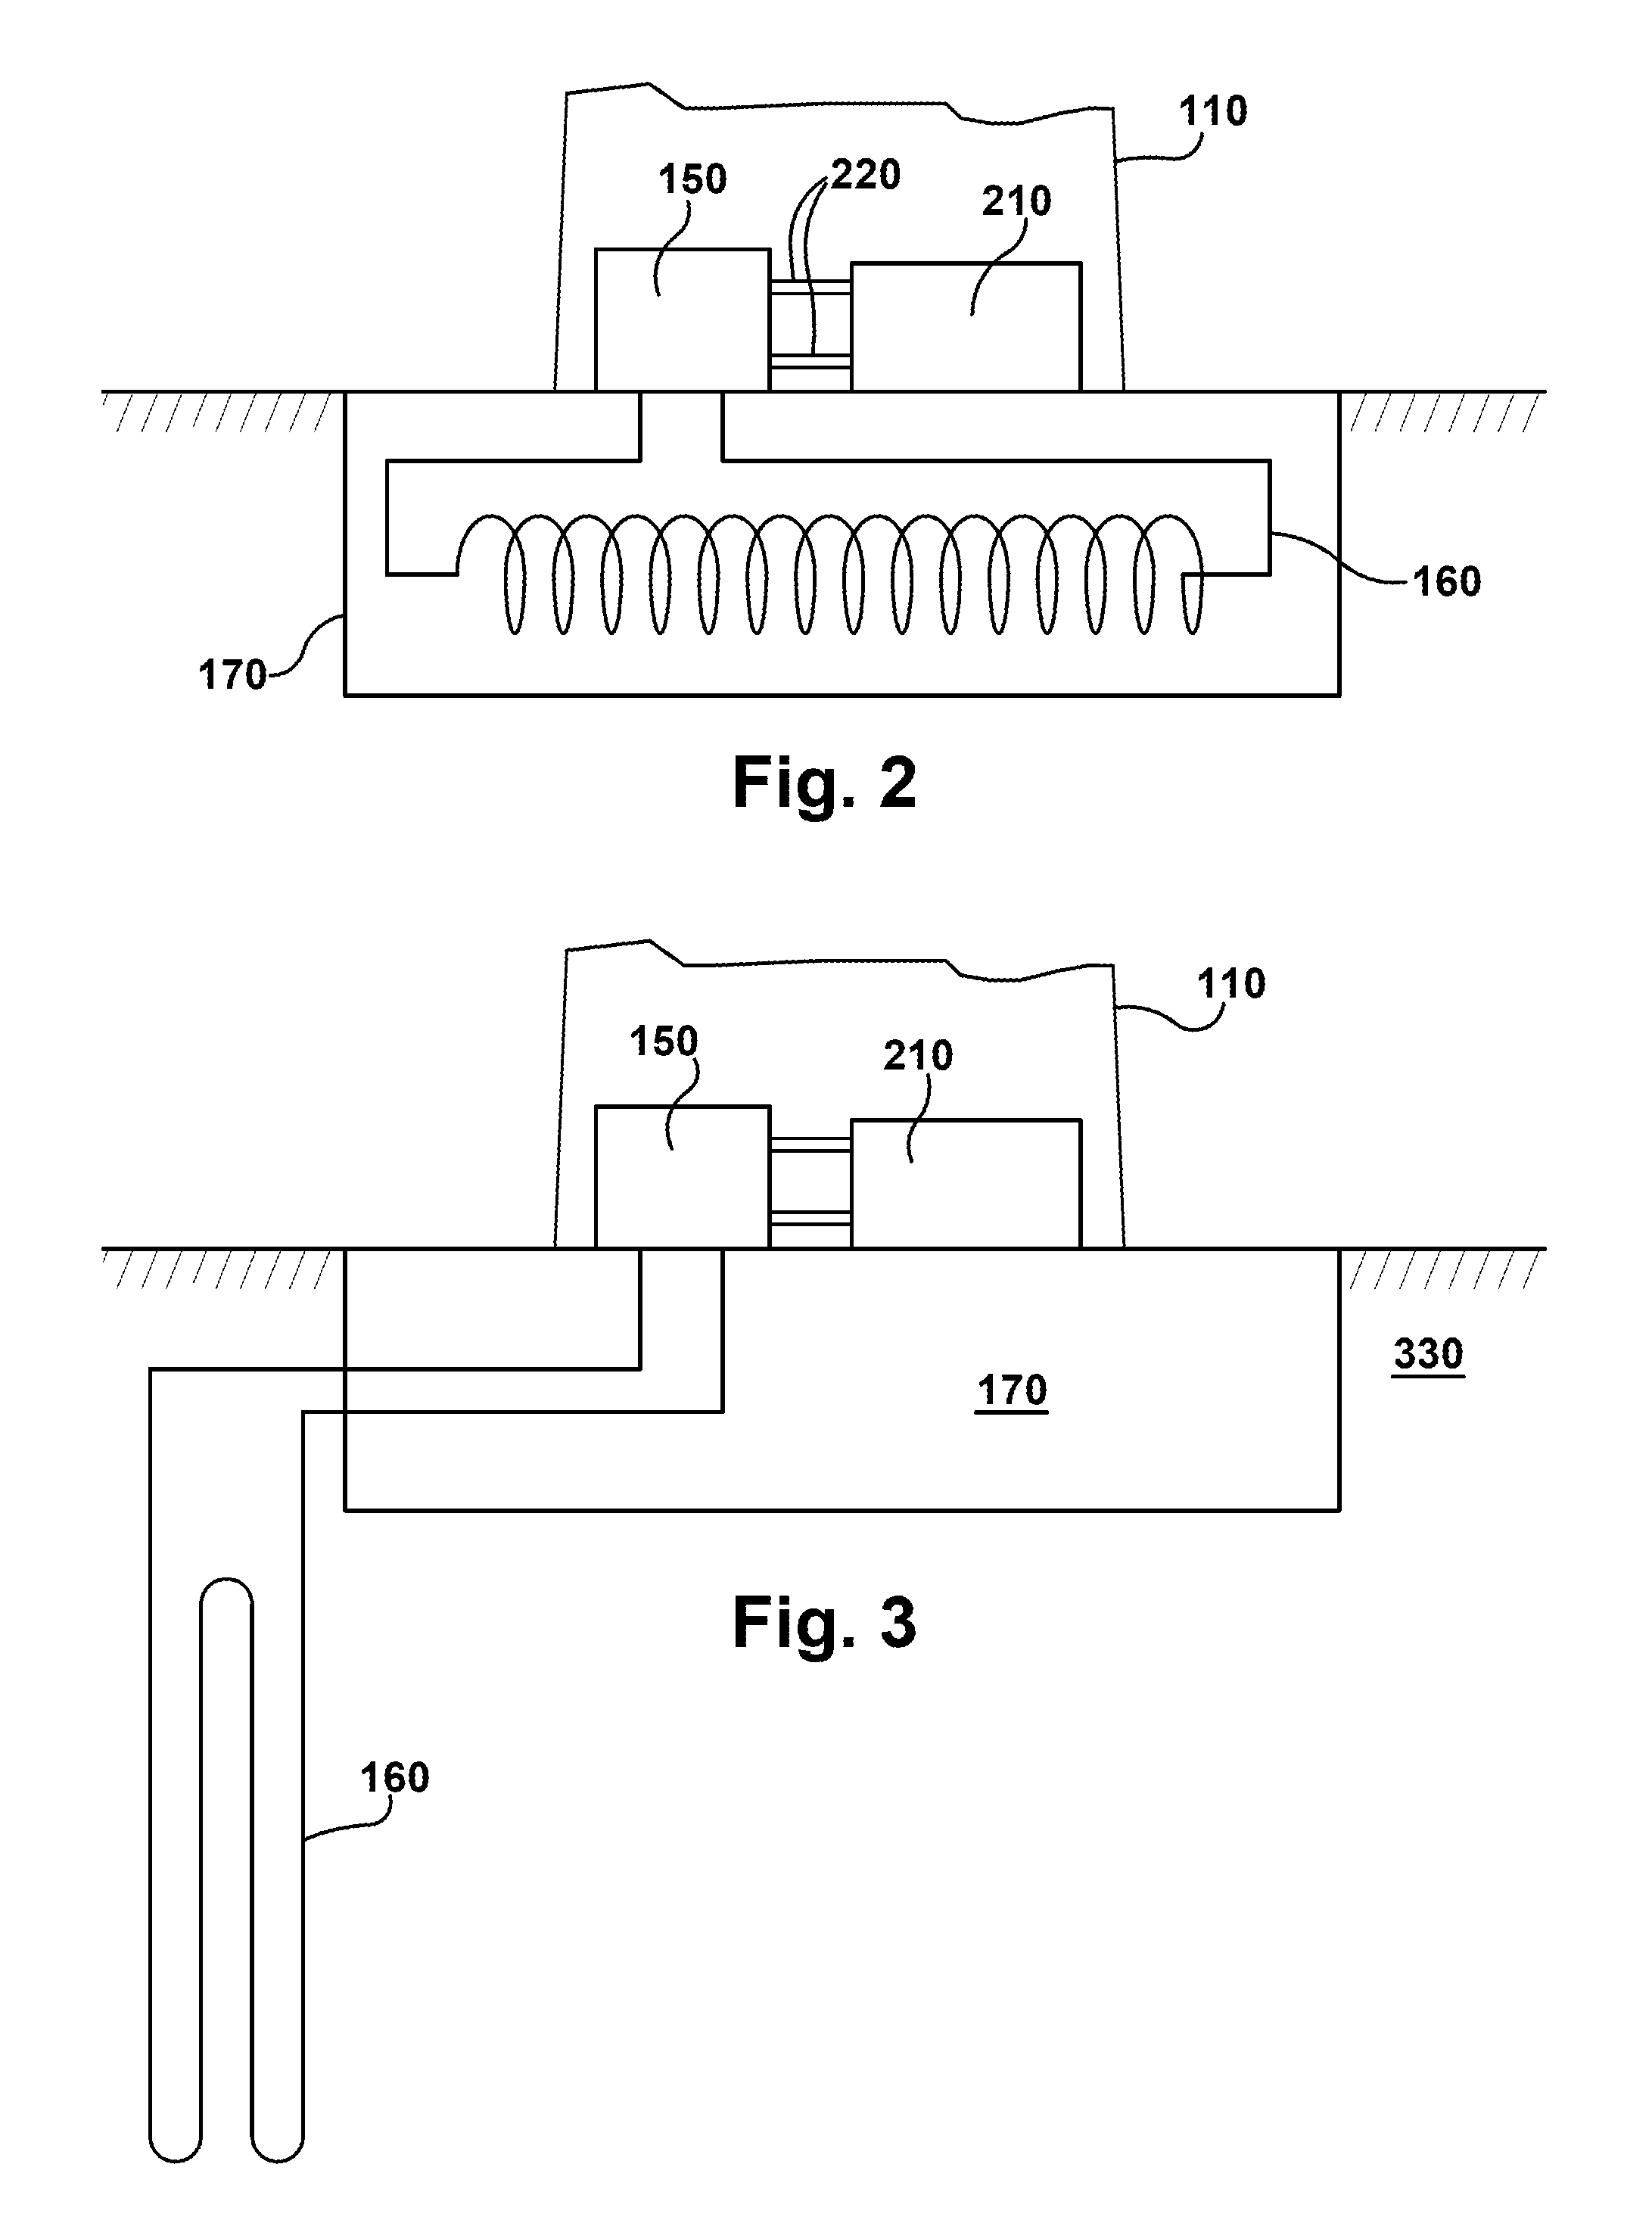 Wind turbine geothermal heating and cooling system